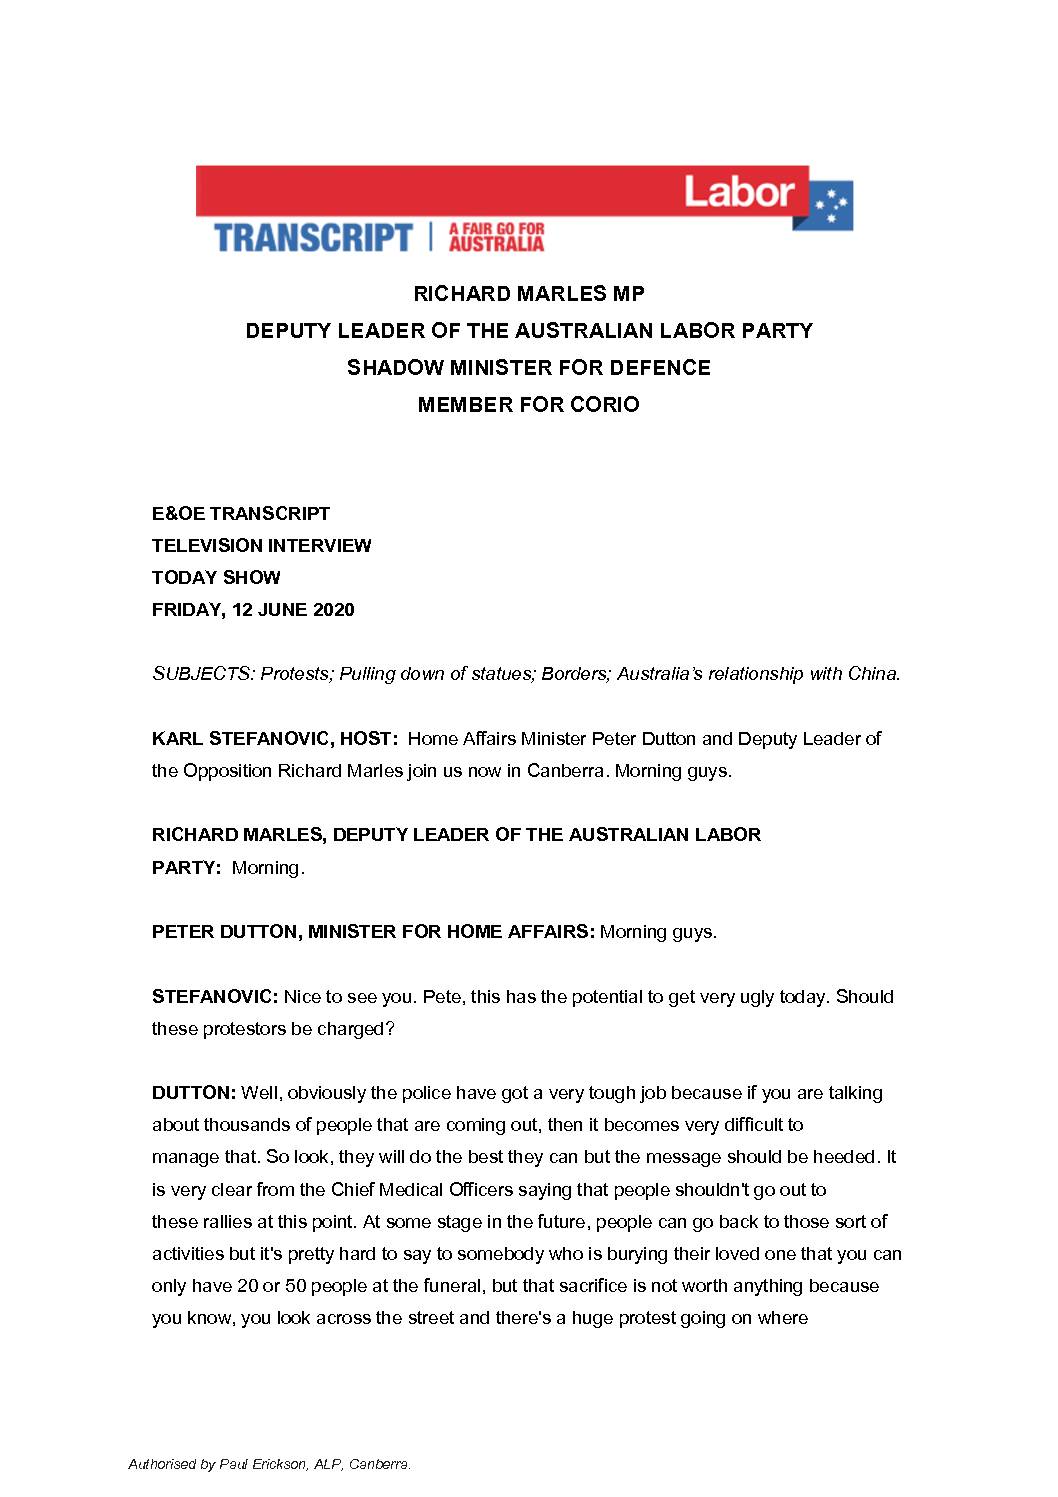 20.06.12-CHANNEL-9-THE-TODAY-SHOW-TRANSCRIPT